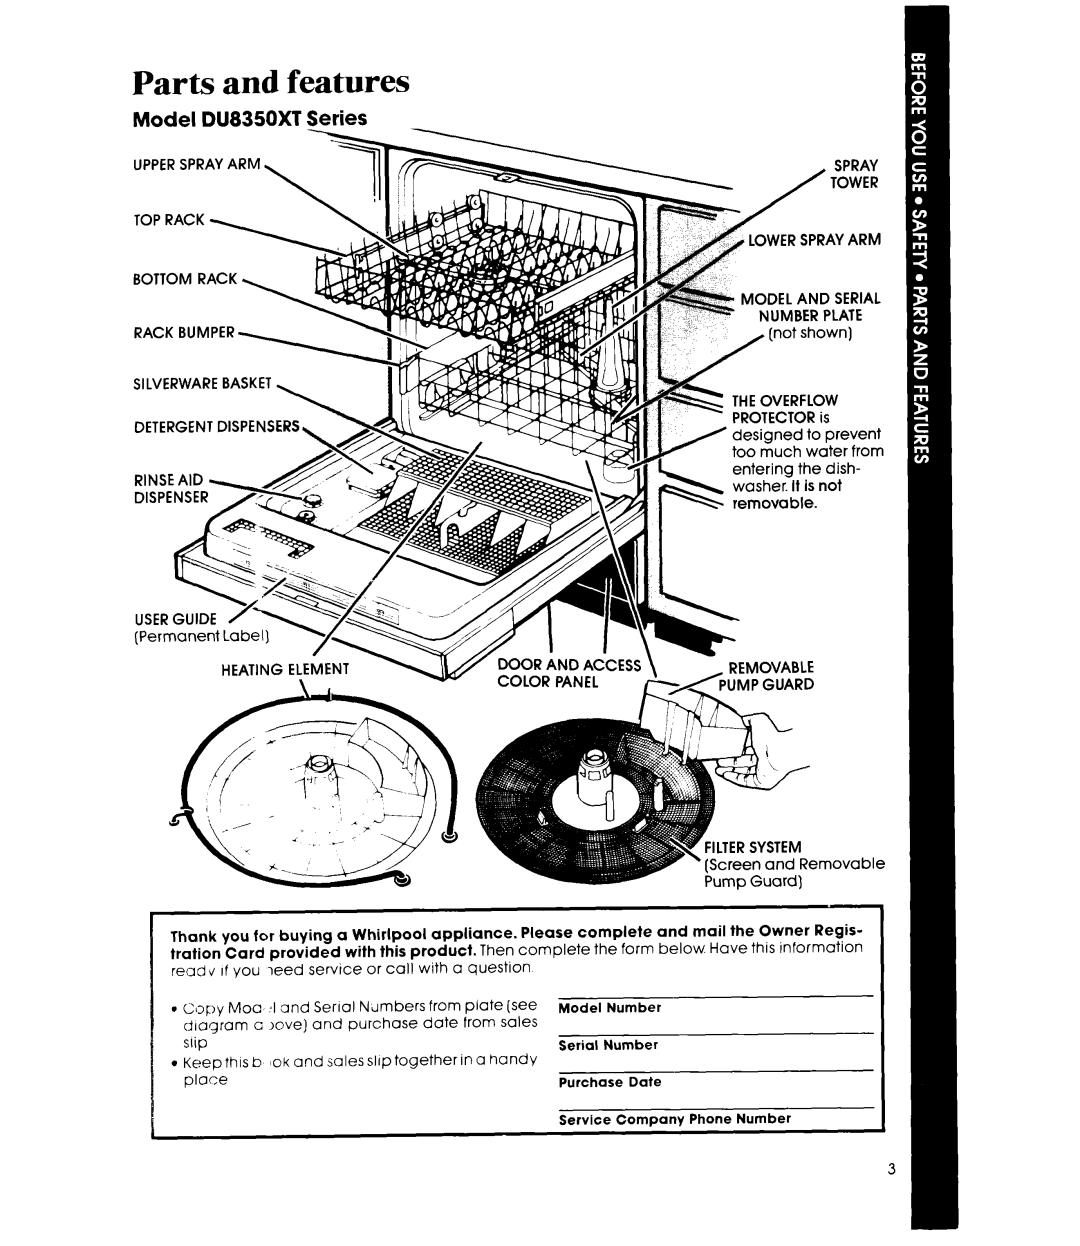 Whirlpool manual Parts and features, Model DU8350XT Series 